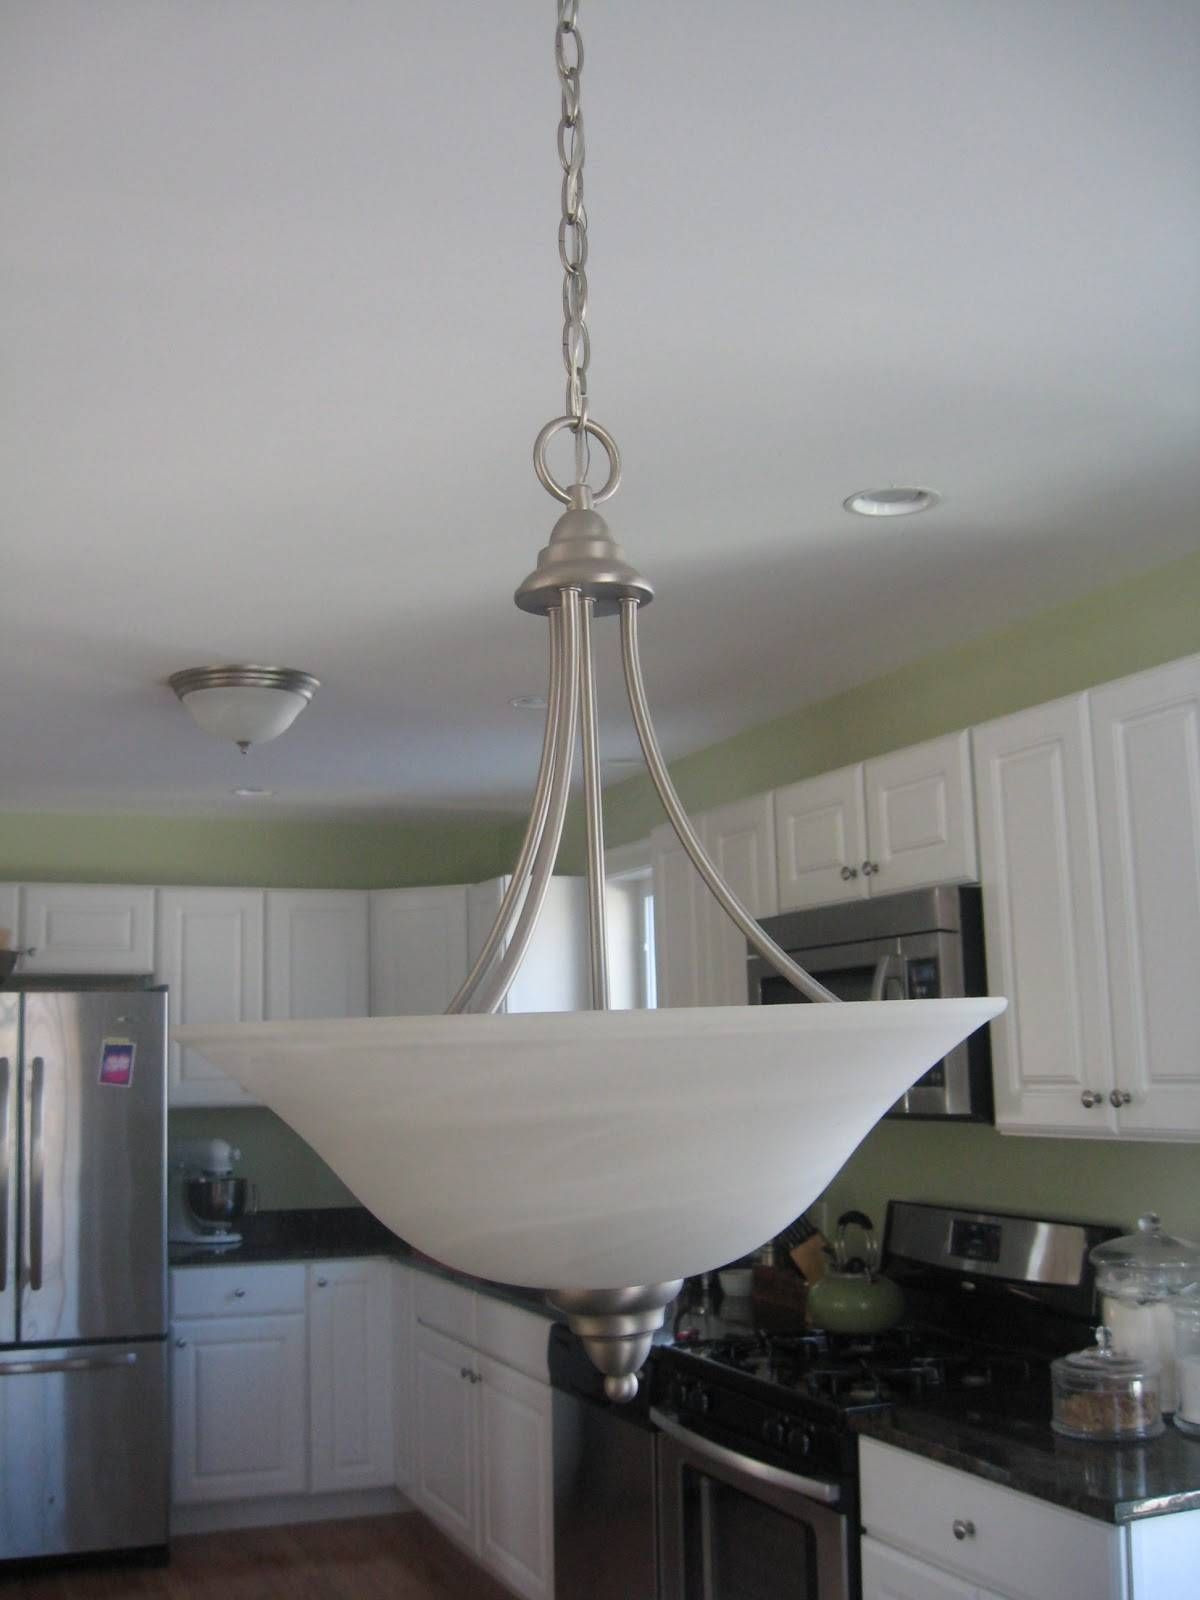 Chandelier: Awesome Kitchen Chandelier Lowes Lowe's Hanging Porch Inside Lowes Kitchen Pendant Lights (View 8 of 15)